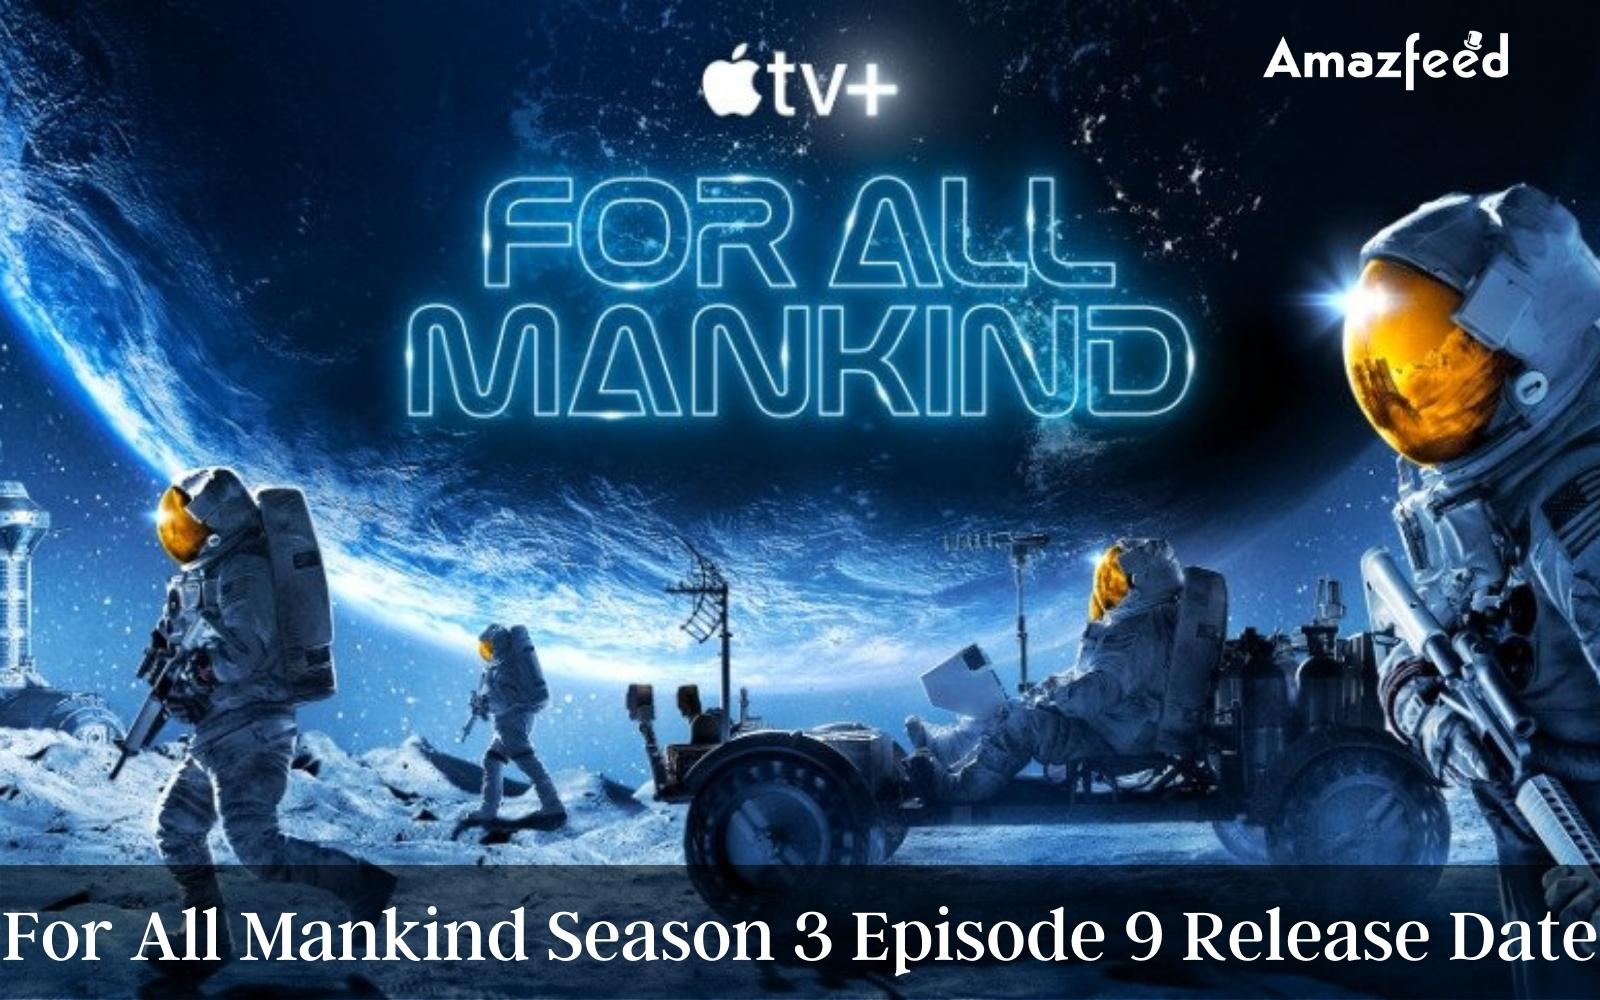 For All Mankind Season 3 Episode 9 ⇒ Countdown, Release Date, Spoilers, Recap, Cast & Where to Watch